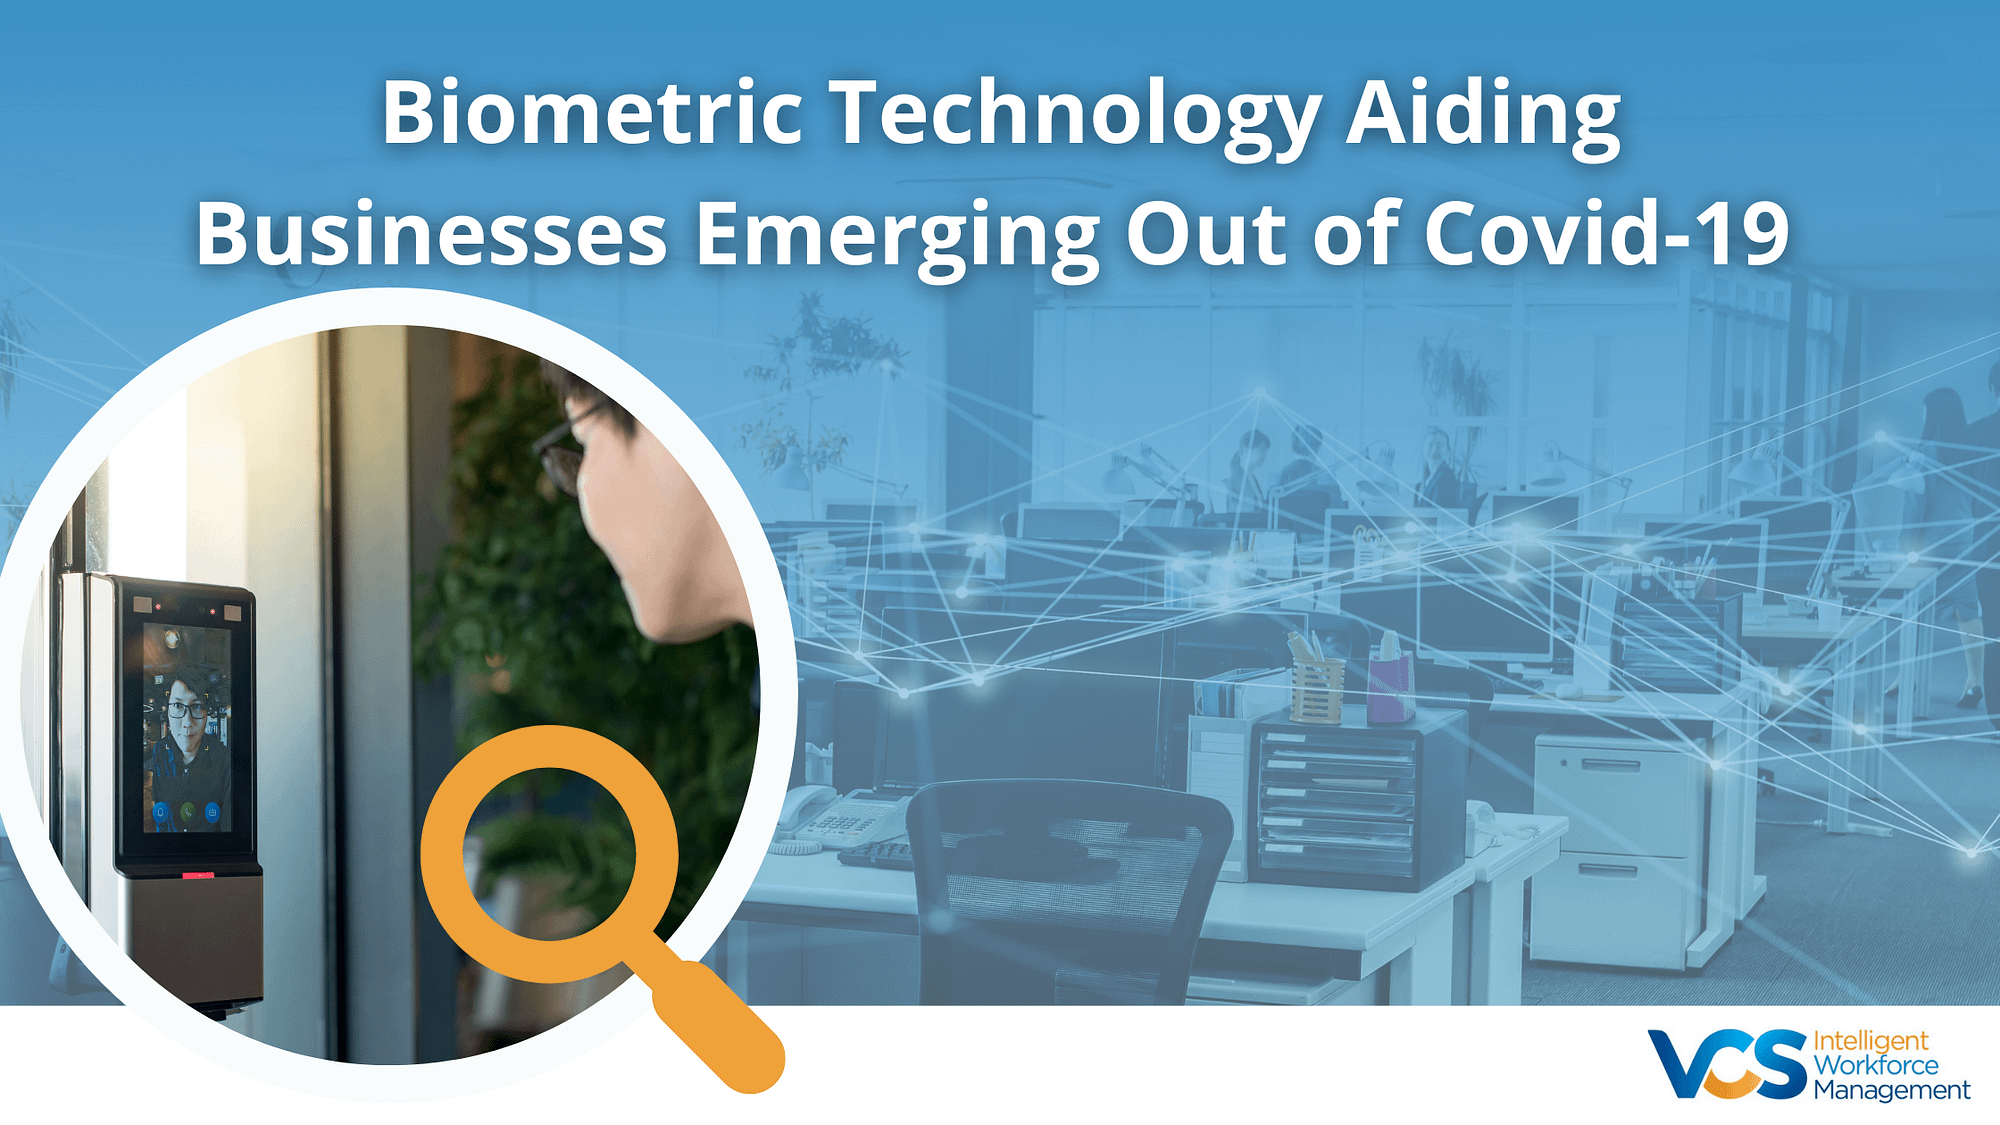 Biometric Technology Aiding Businesses Emerging Out of Covid-19